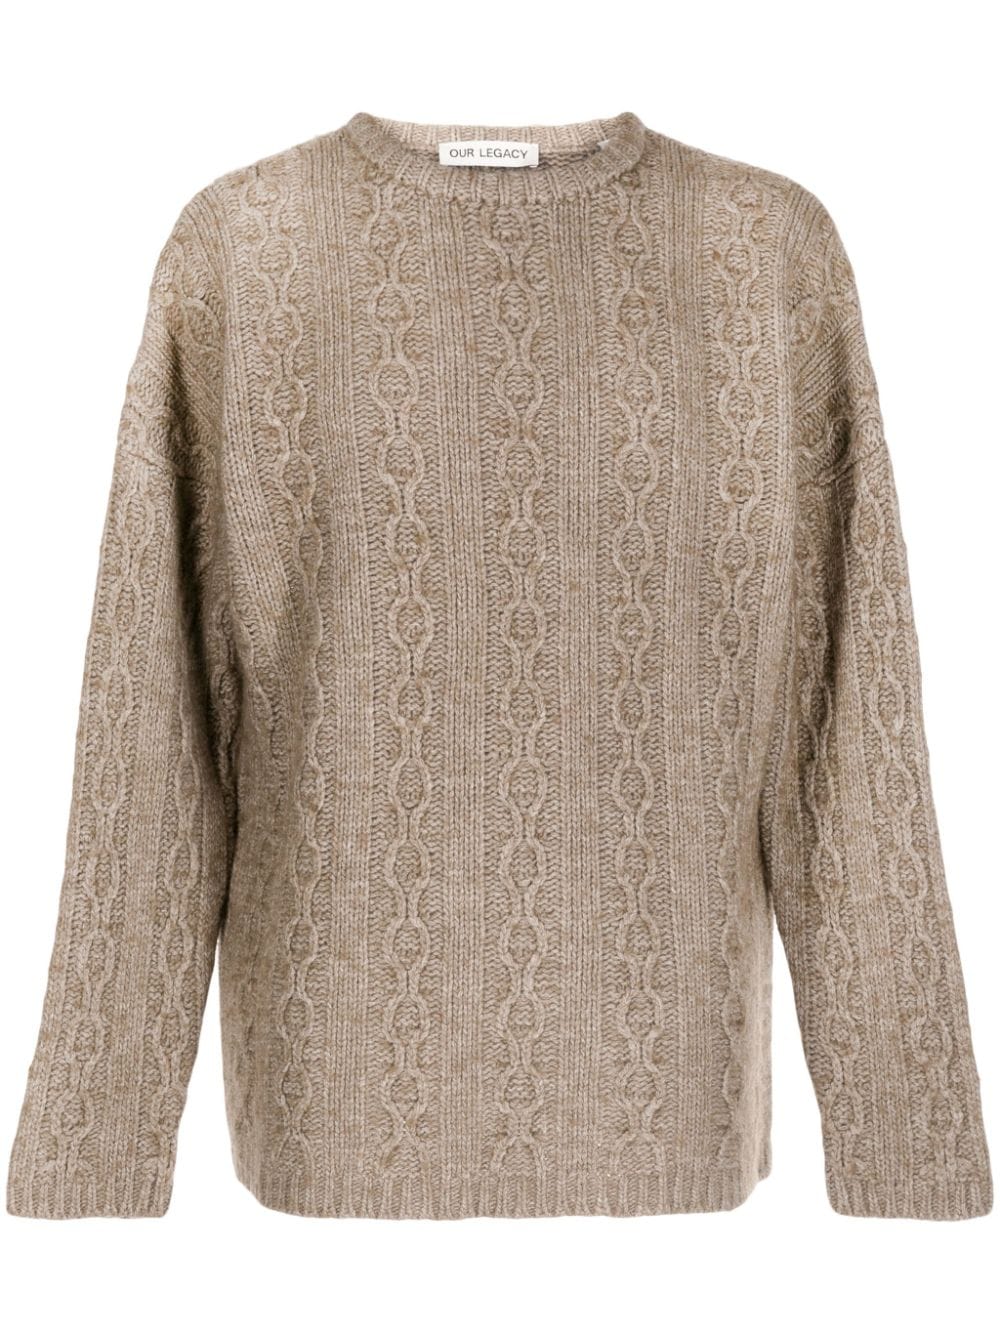 OUR LEGACY cable-knit jumper - Neutrals von OUR LEGACY